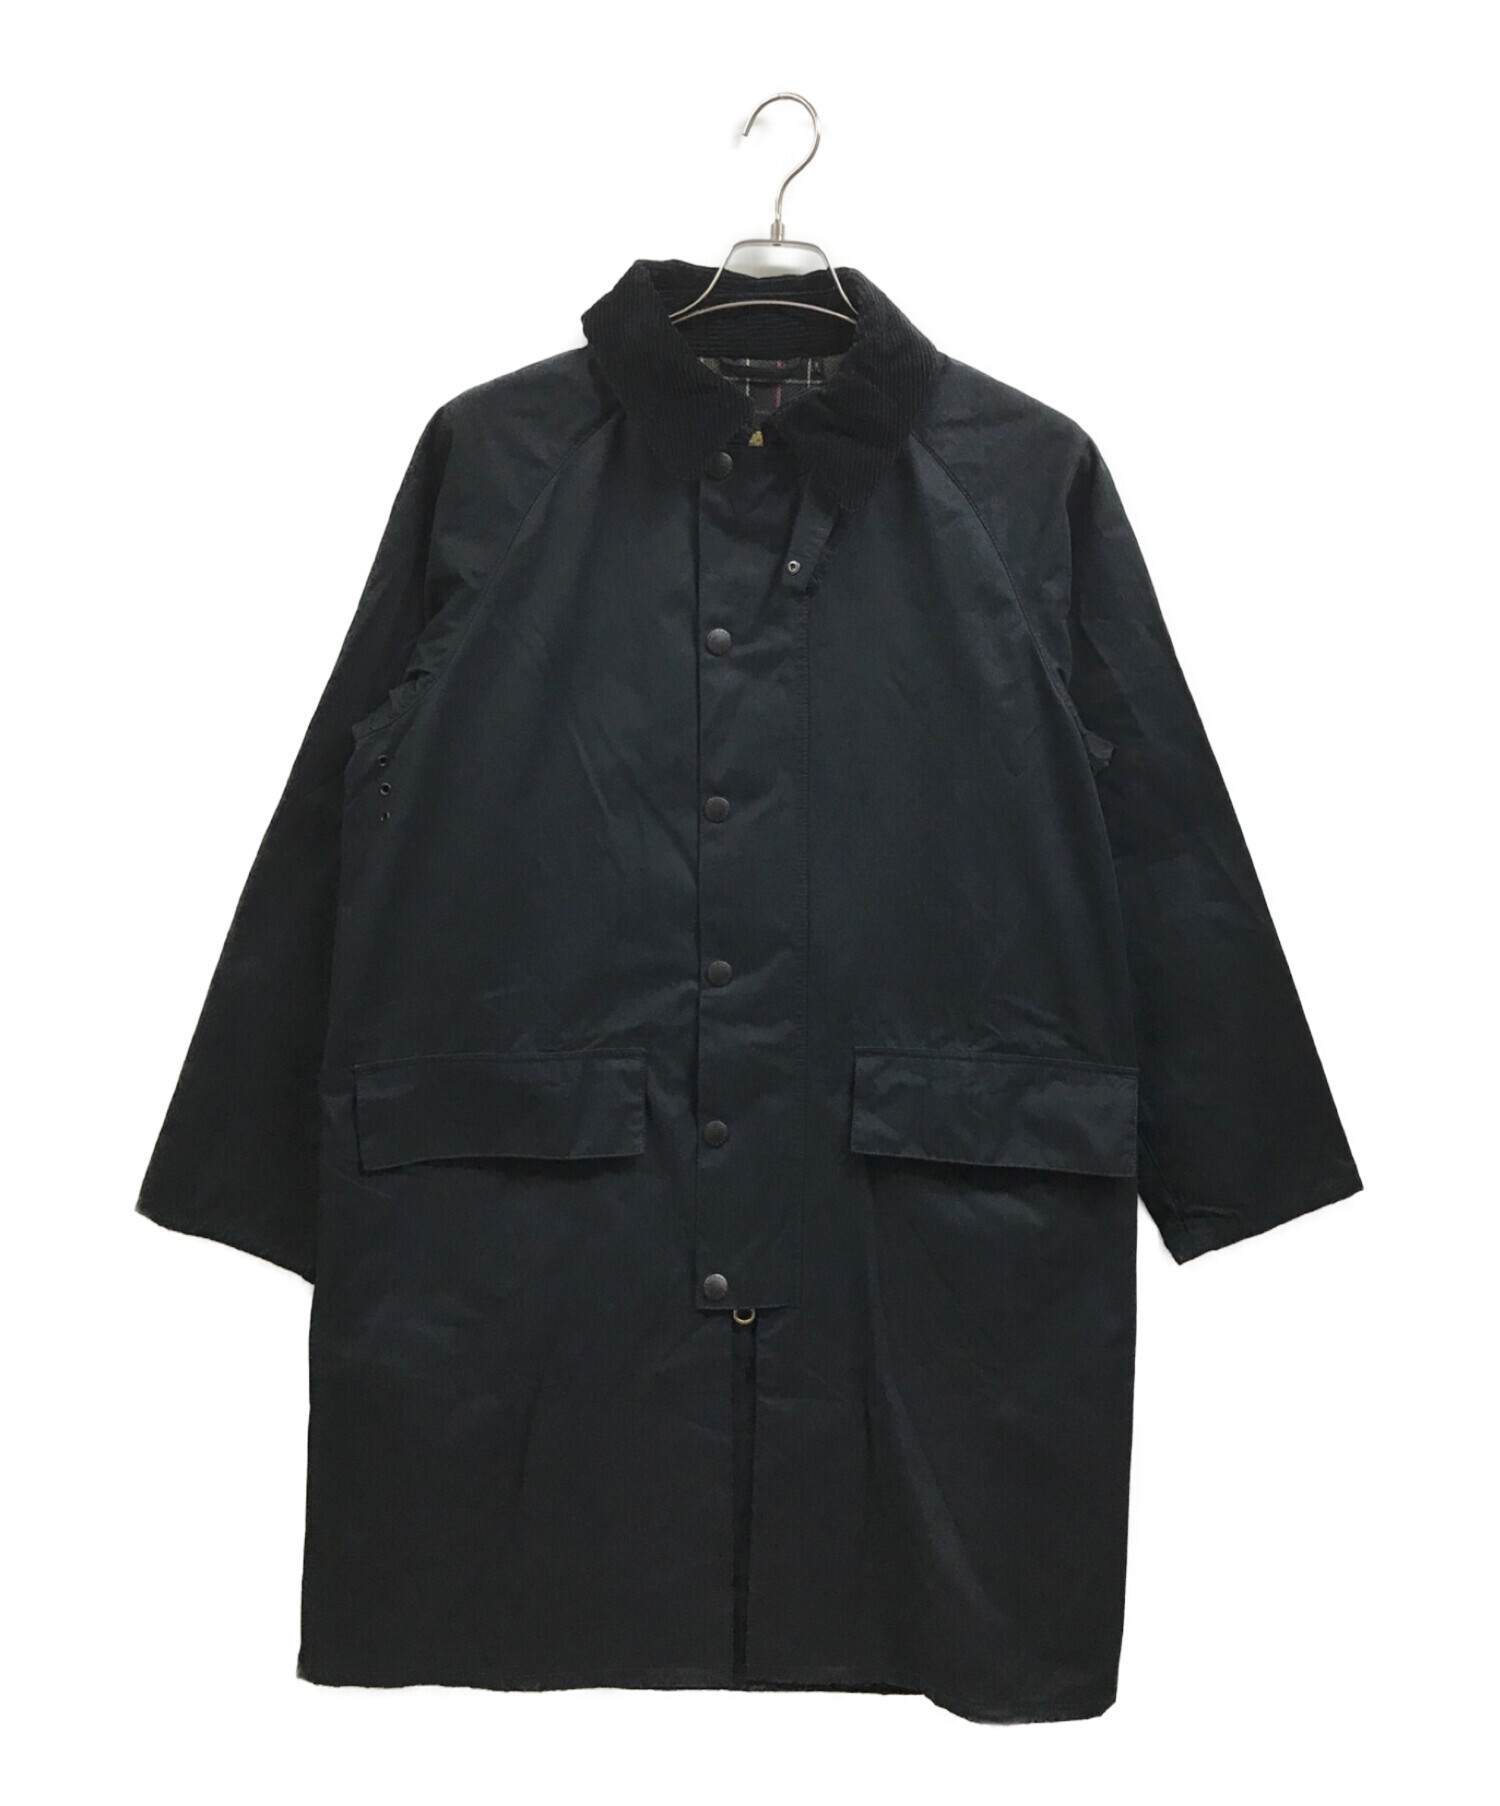 Barbour バブアー コート 36(S位) 黒